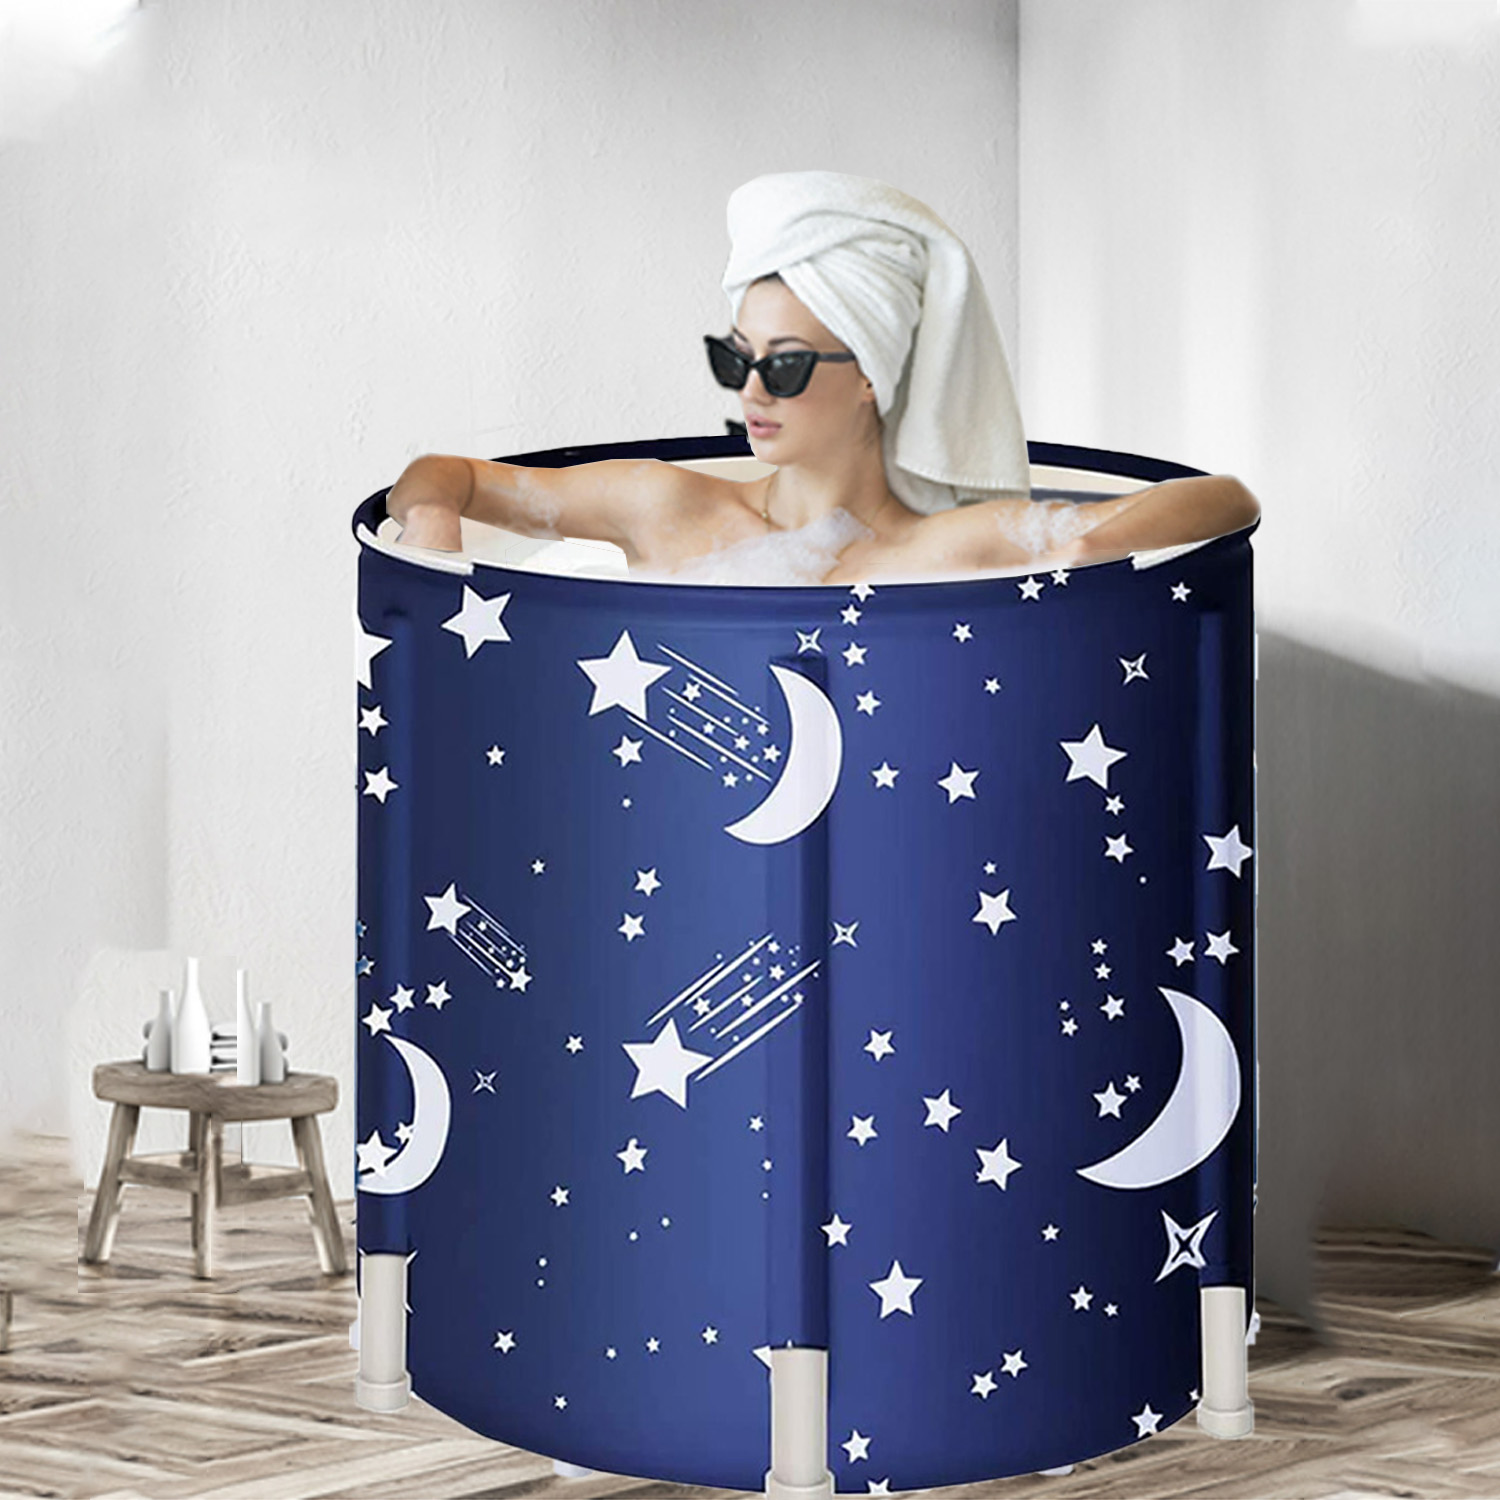 Portable Bathtub Foldable Adult Soaking Bath Tub Freestanding Ice and Hot tubs with Lid and Inflatable Pillow for Small Spaces,Starry Night Blue,27.627.625.6 in - image 1 of 8